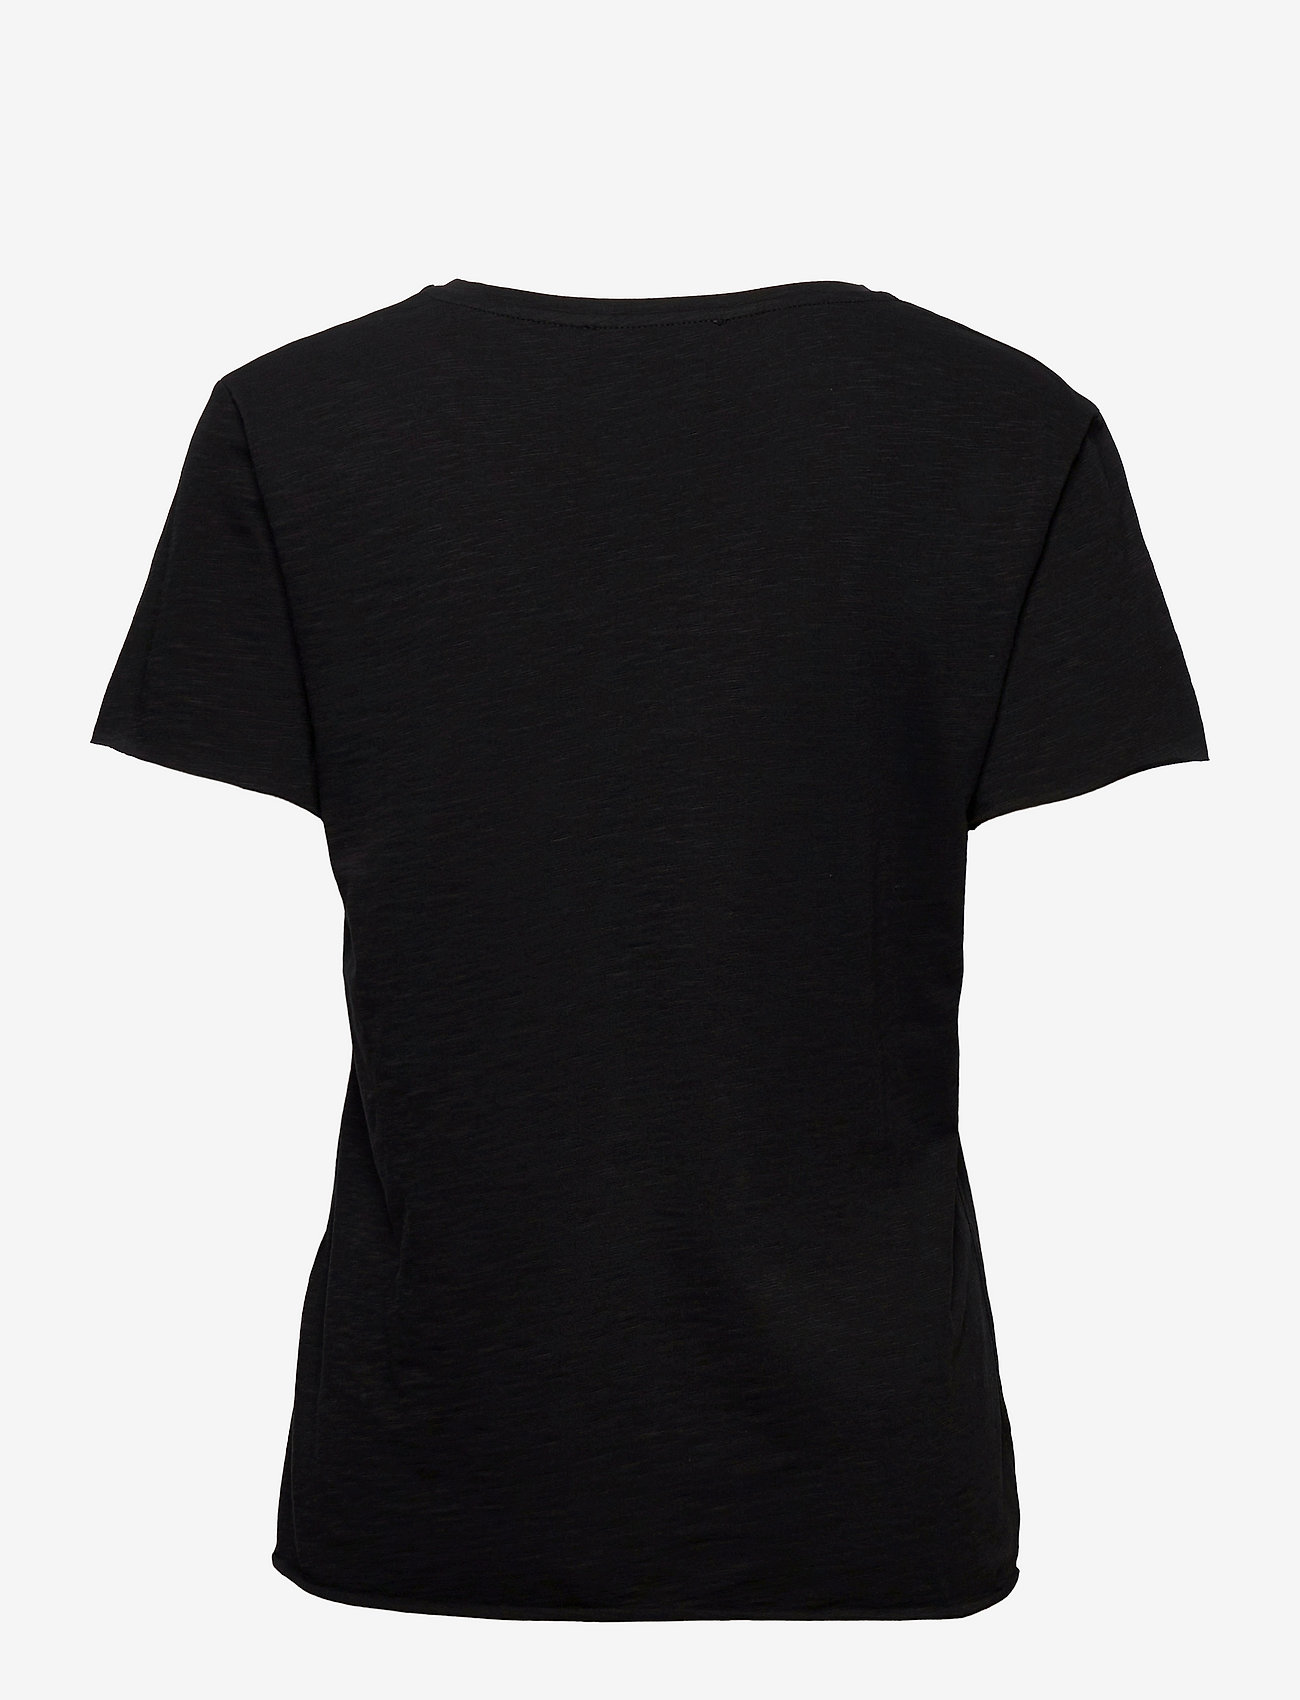 My Essential Wardrobe - 08 THE VTEE - lowest prices - black - 1